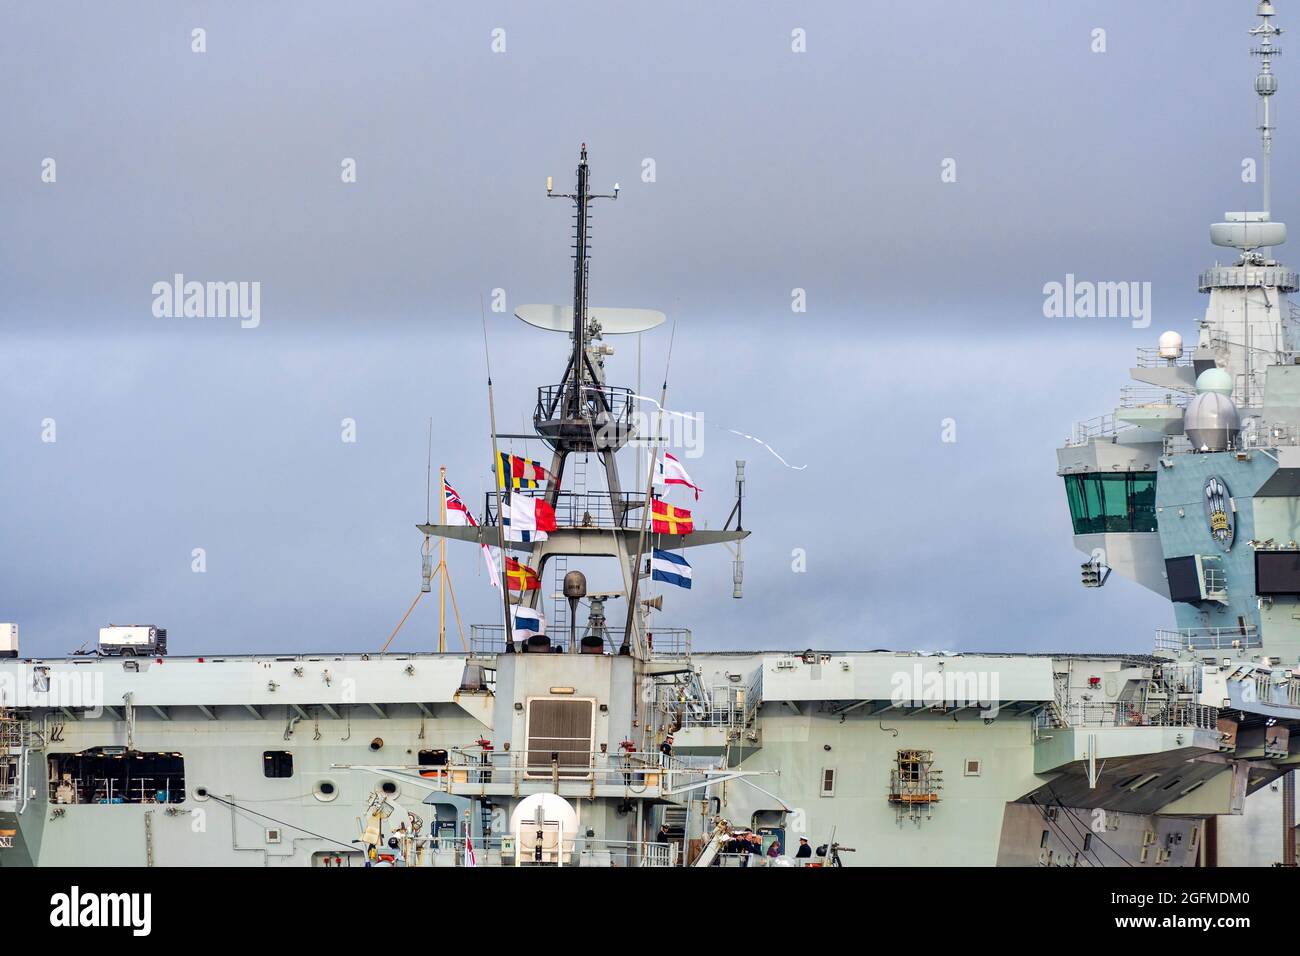 Guardship High Resolution Stock Photography and Images - Alamy